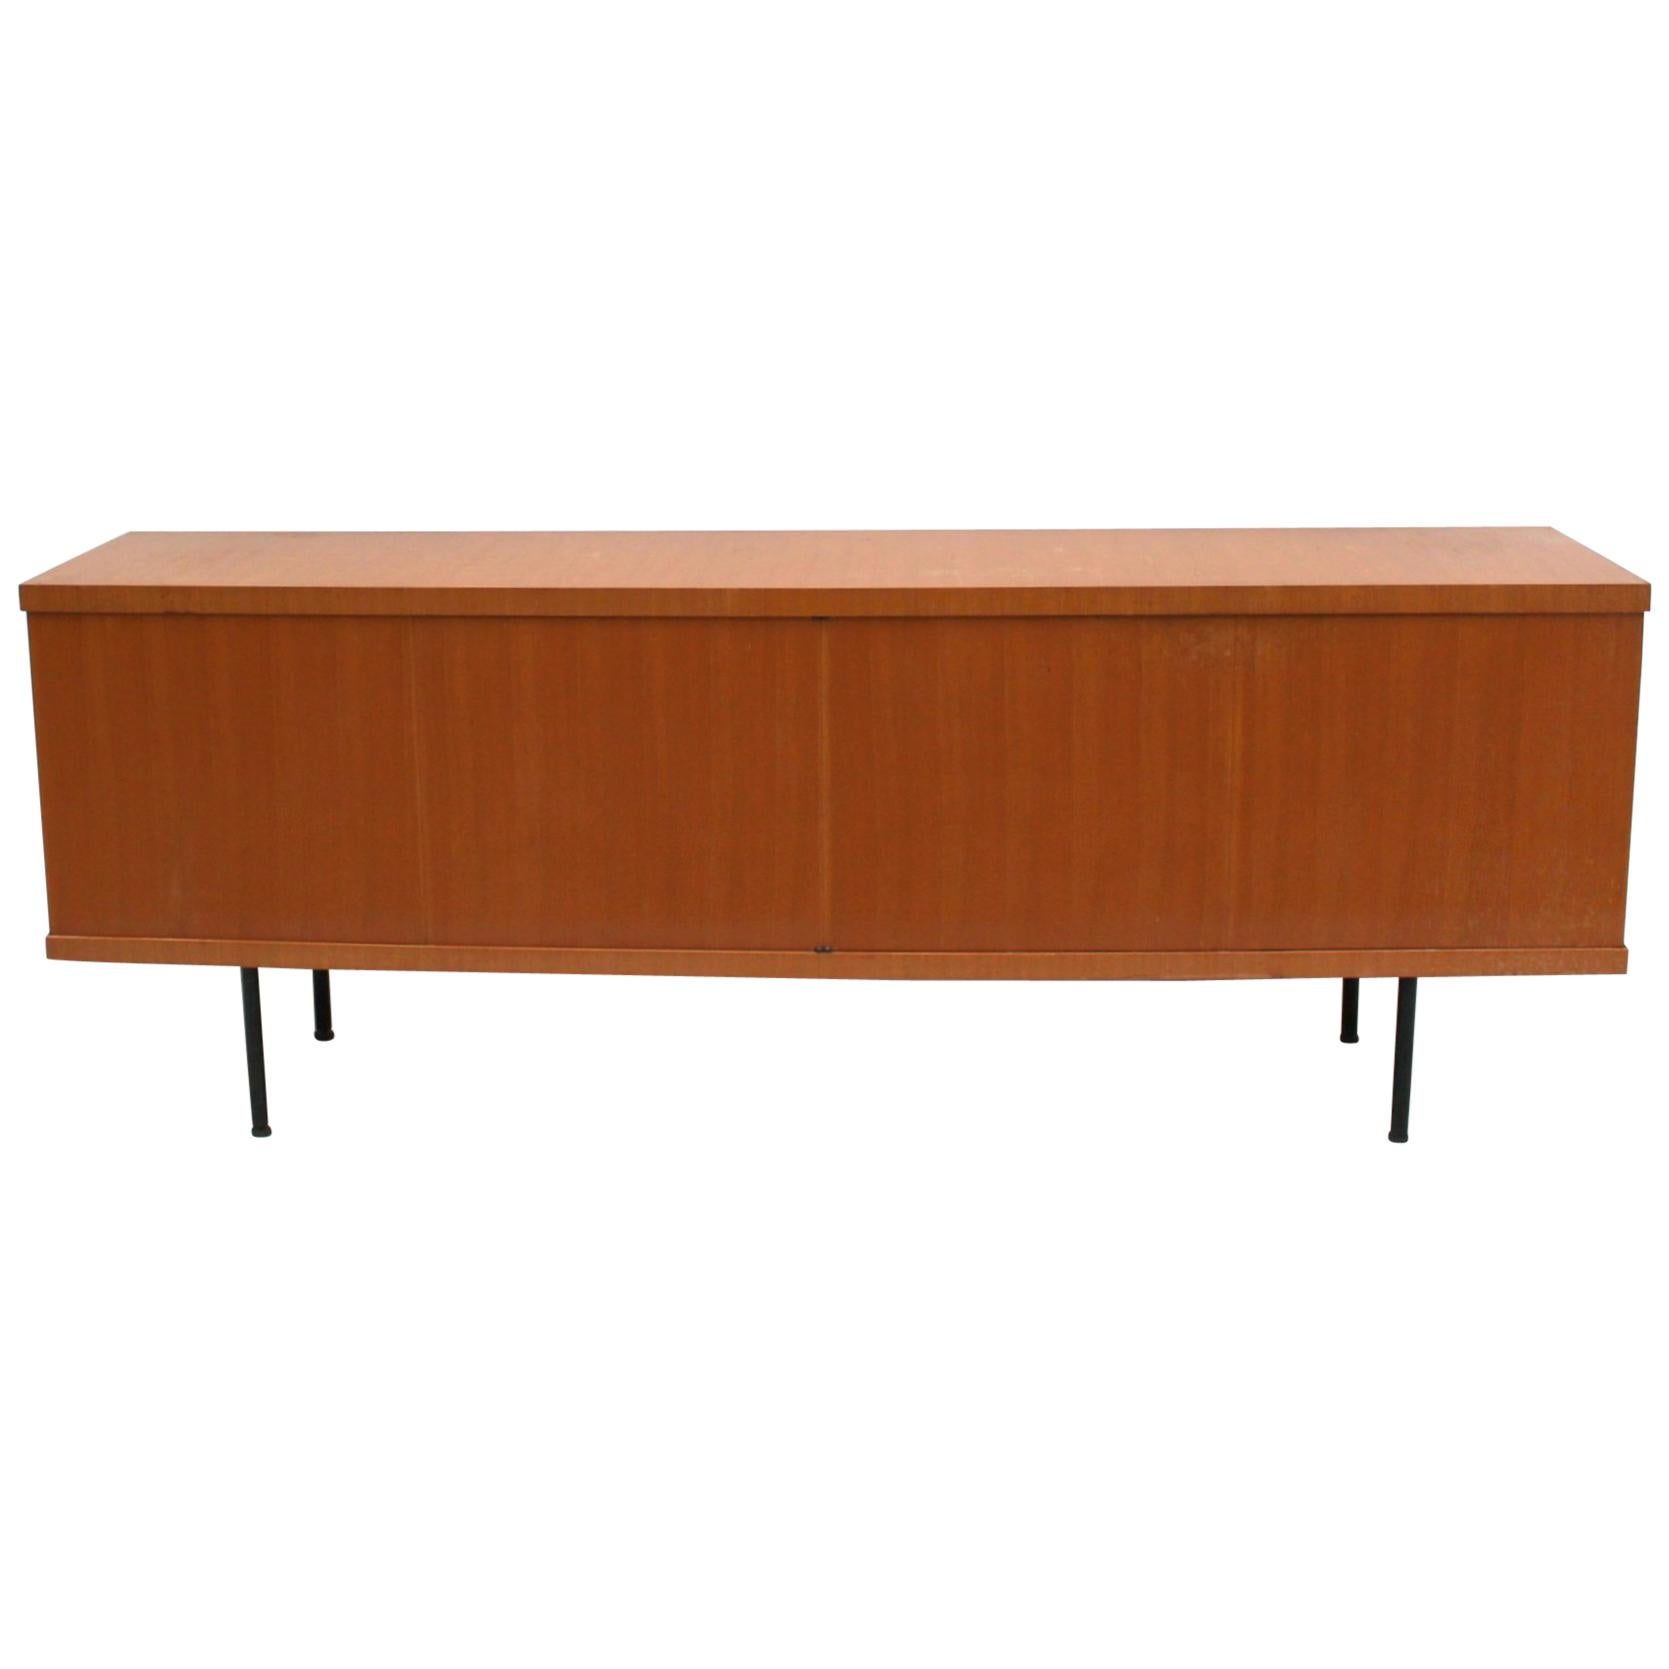 Fine French 1950s "Monaco" Sideboard by Gerard Guermonprez, Edited by Magnani